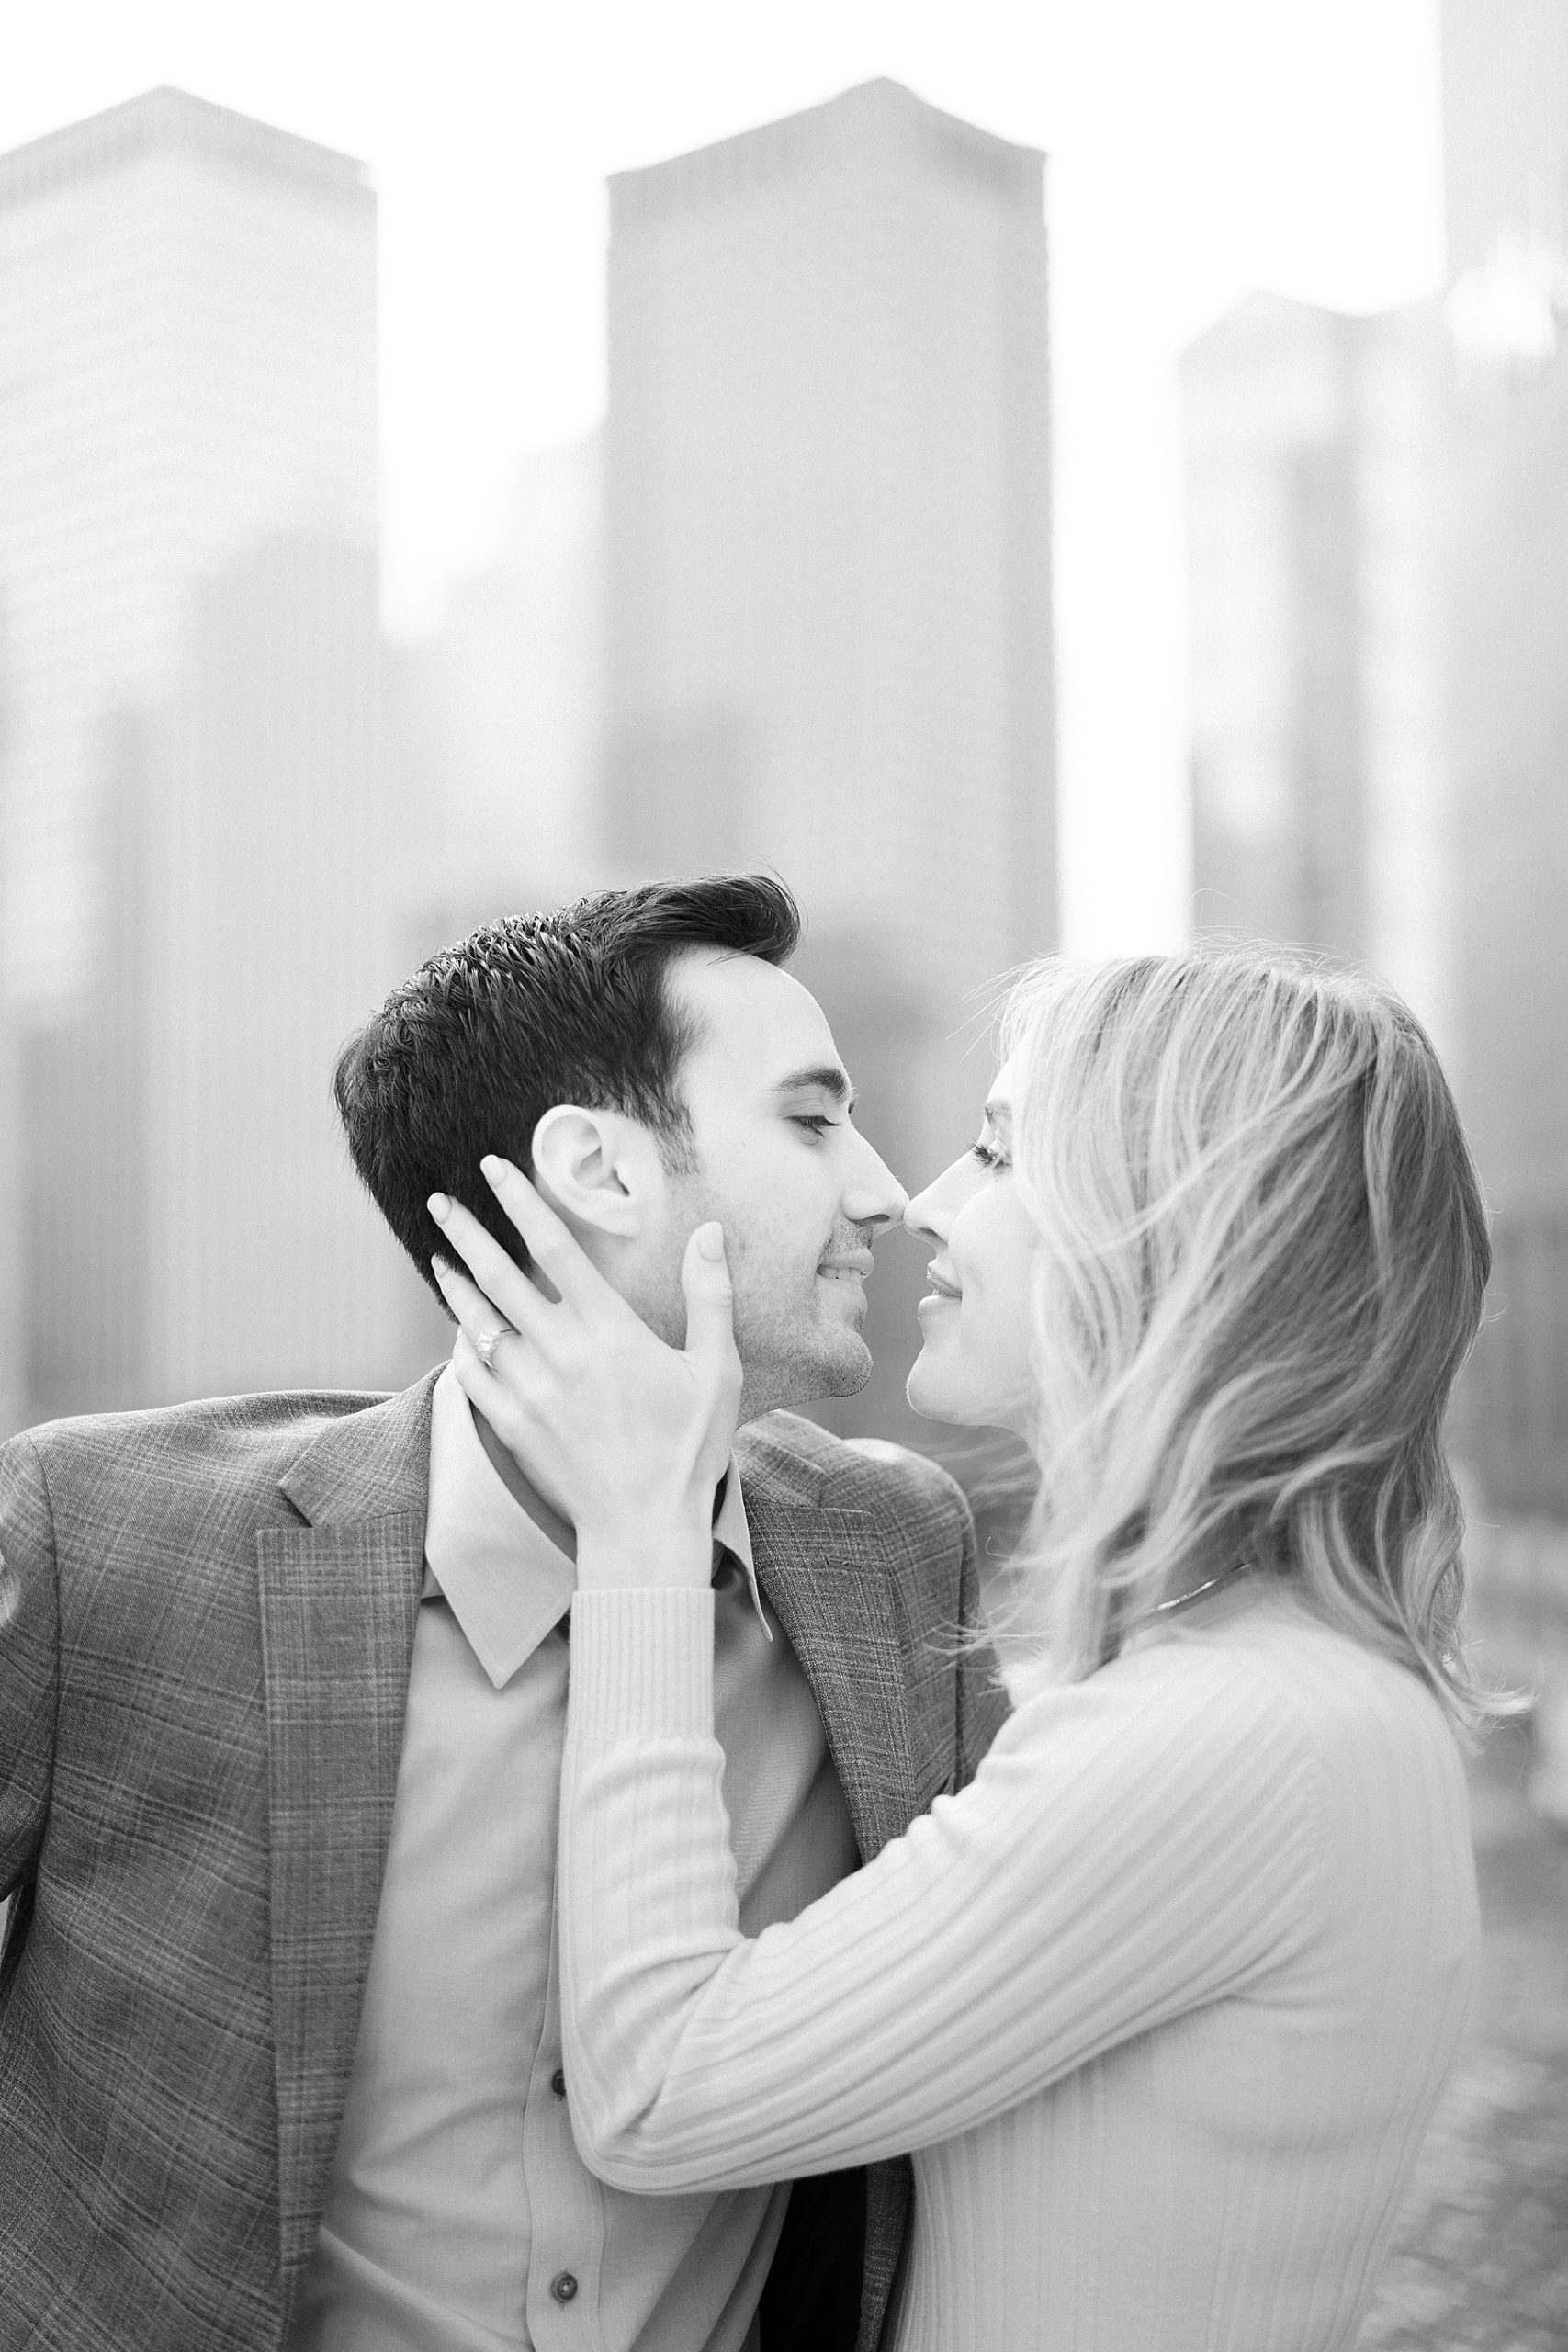 Chicago engagement session
